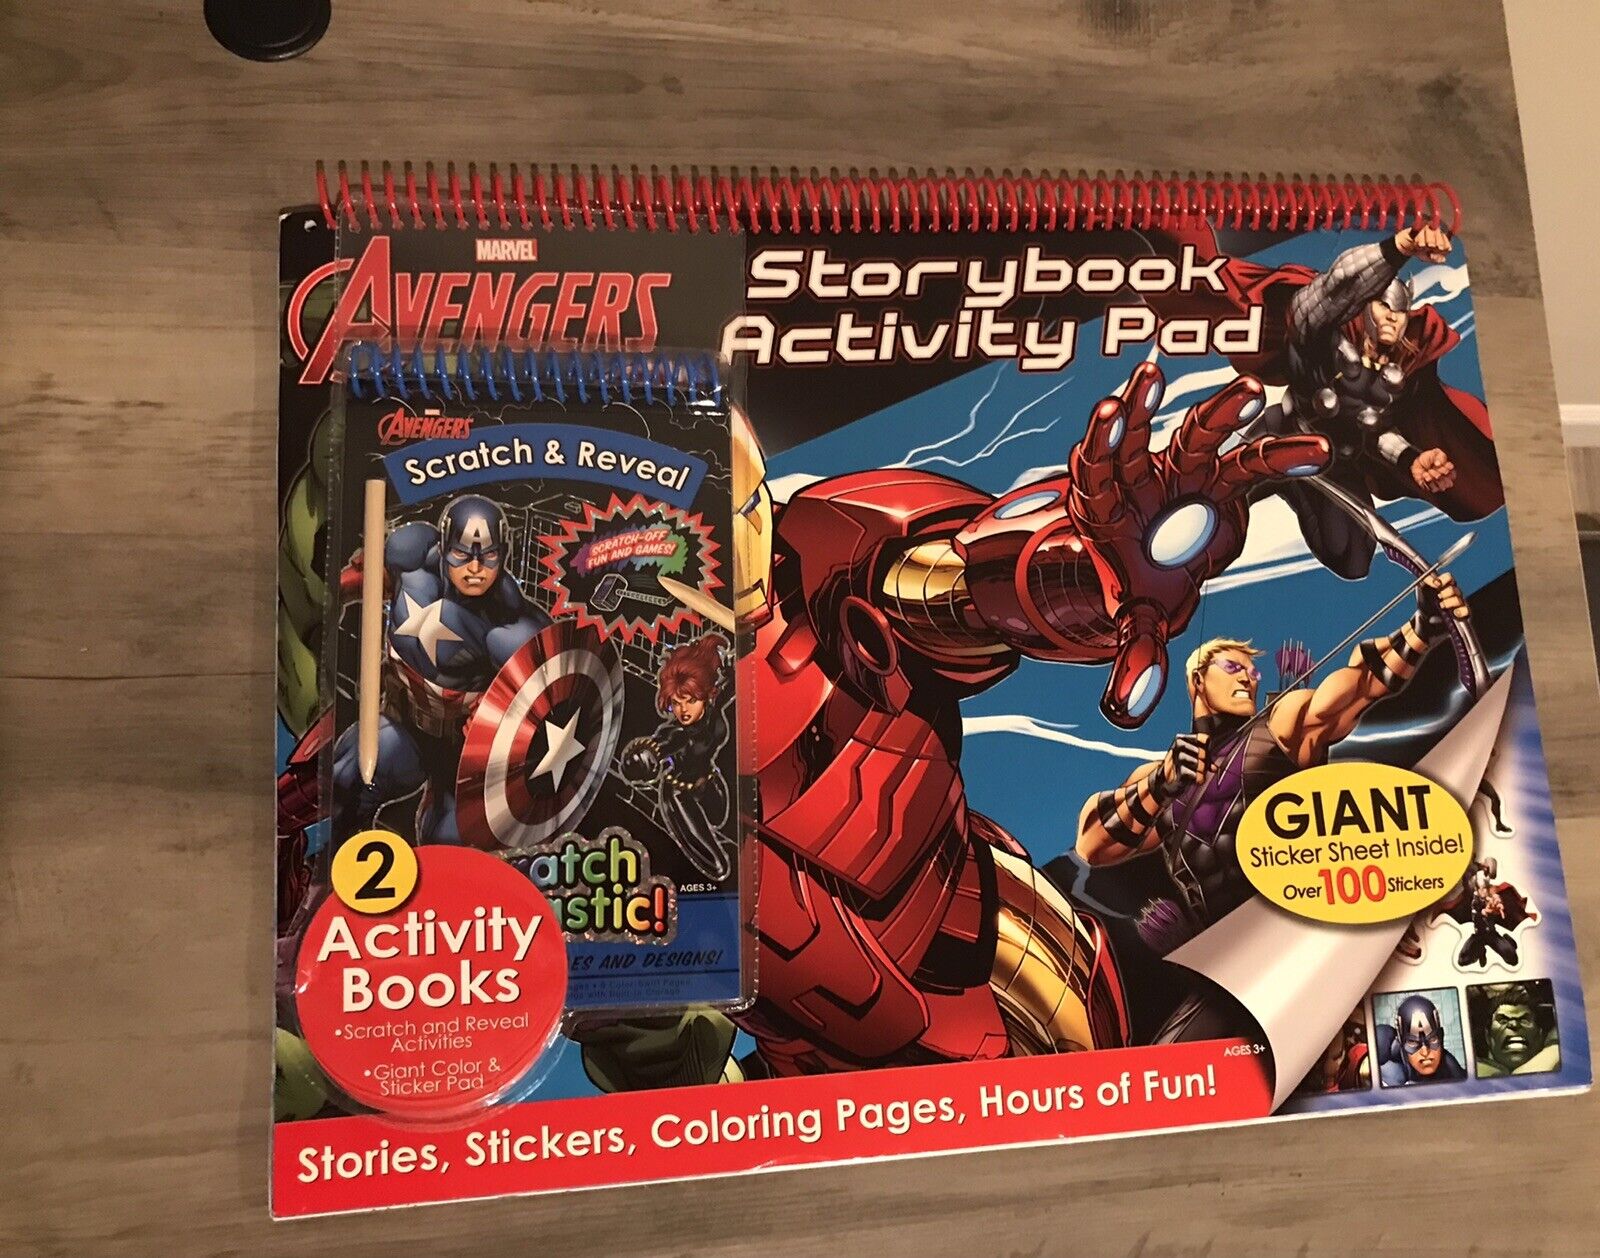 Marvel Avengers Storybook Activity Pad & Scratch & Reveal Activity Book